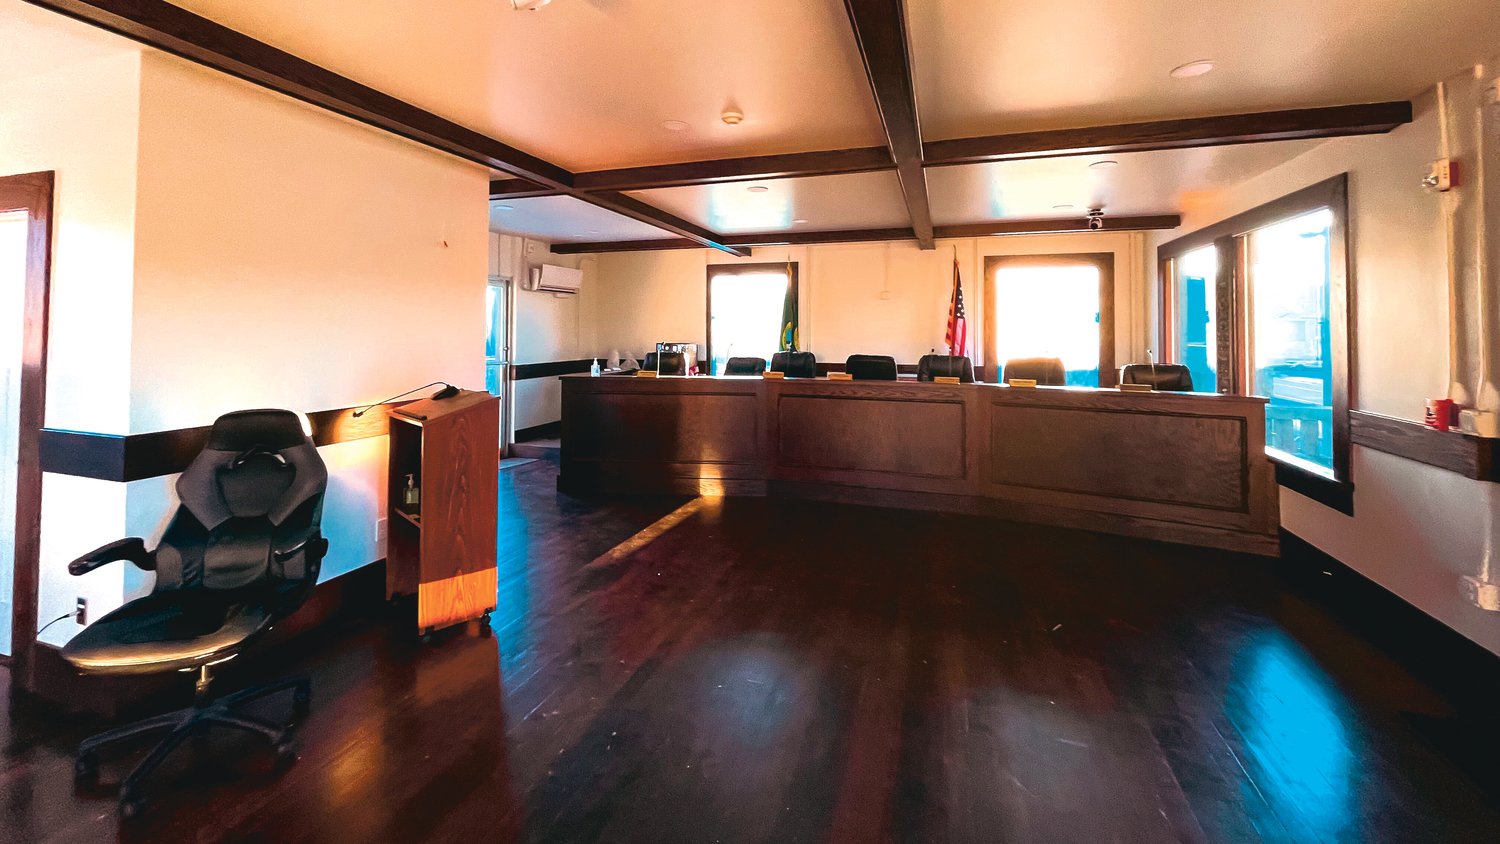 New flooring, exposed roof beams, and a custom podium recreate vintage design inside Tenino City Hall during a renovatio project seen Friday afternoon.